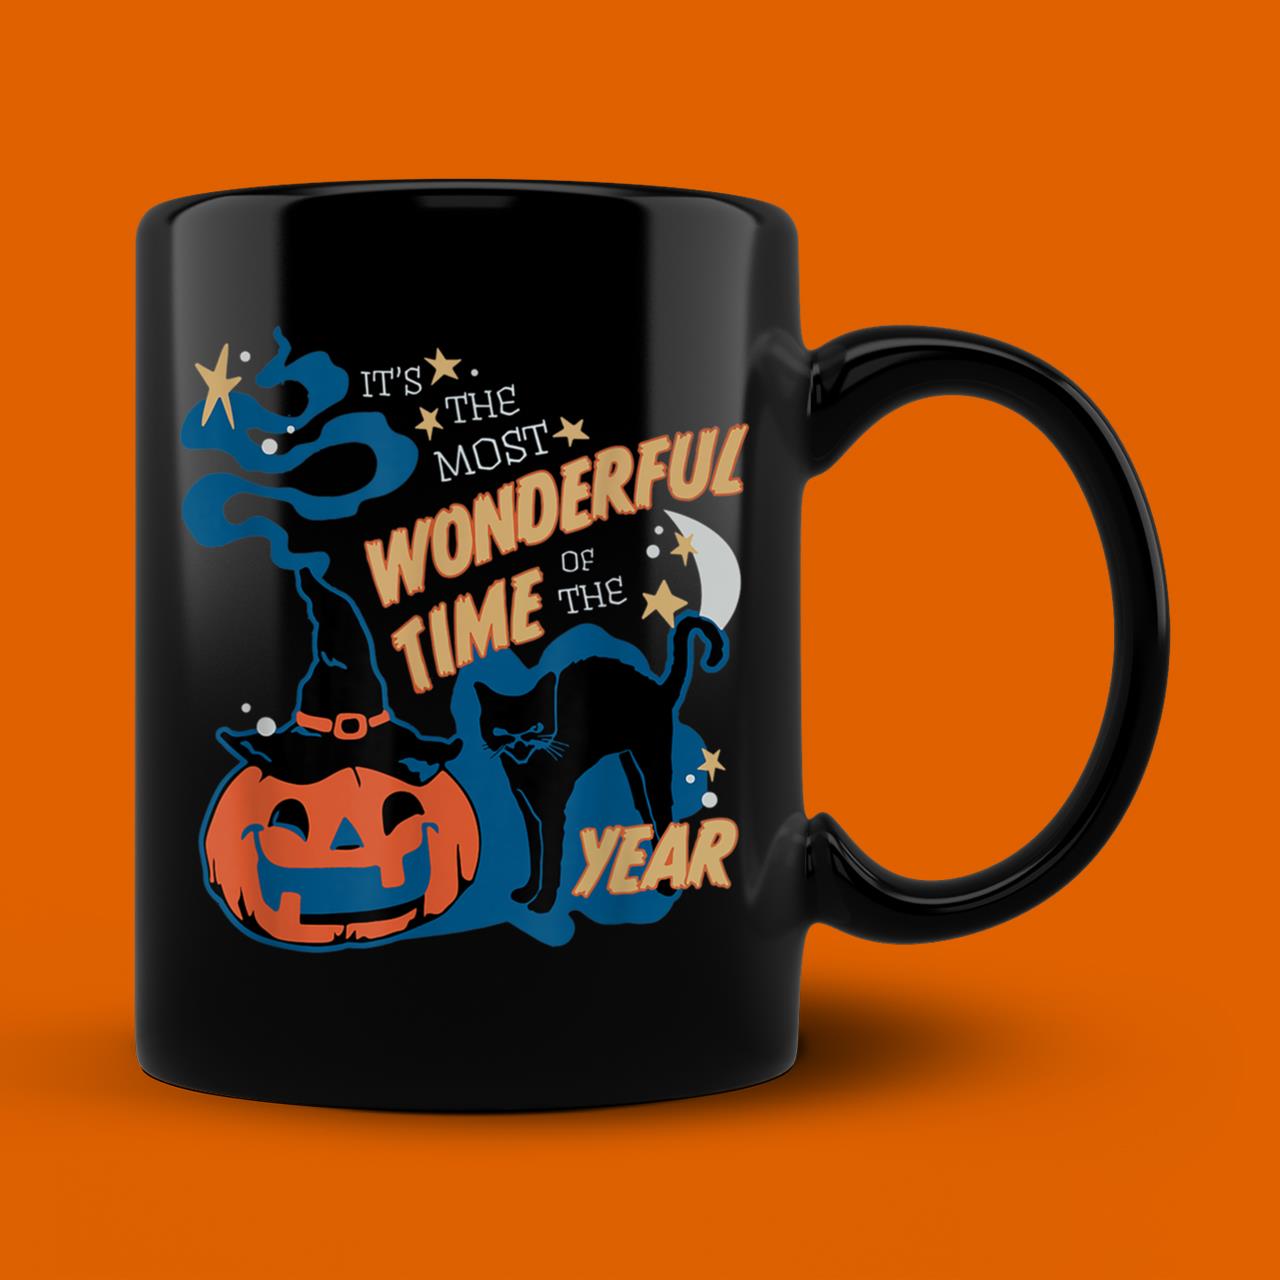 It’s the Most Wonderful Time Of The Year Black Cat Halloween T-Shirt